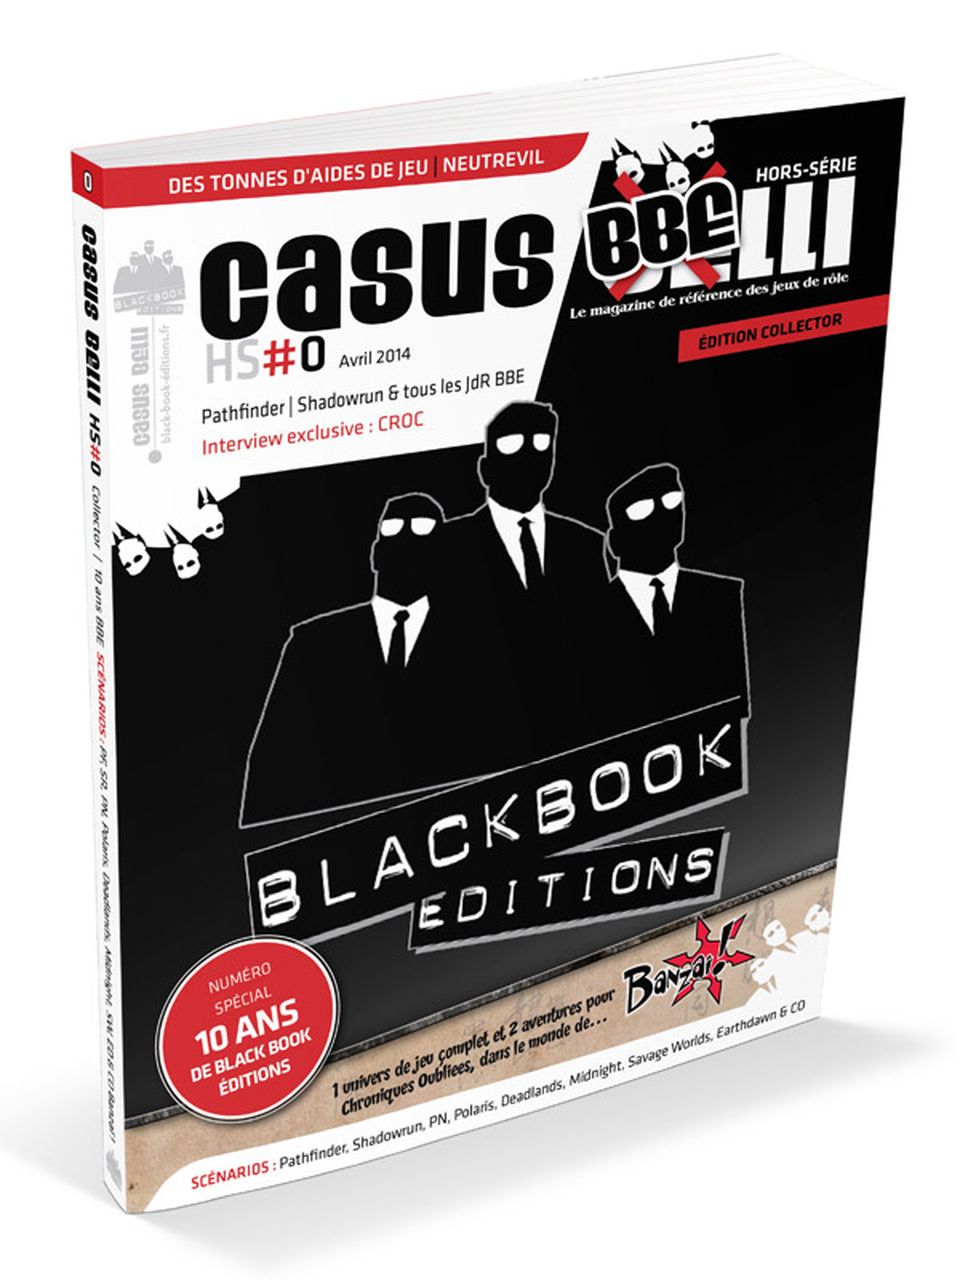 Casus Belli Hors-série #0 - Casus BBElli Edition Collector + Poster image